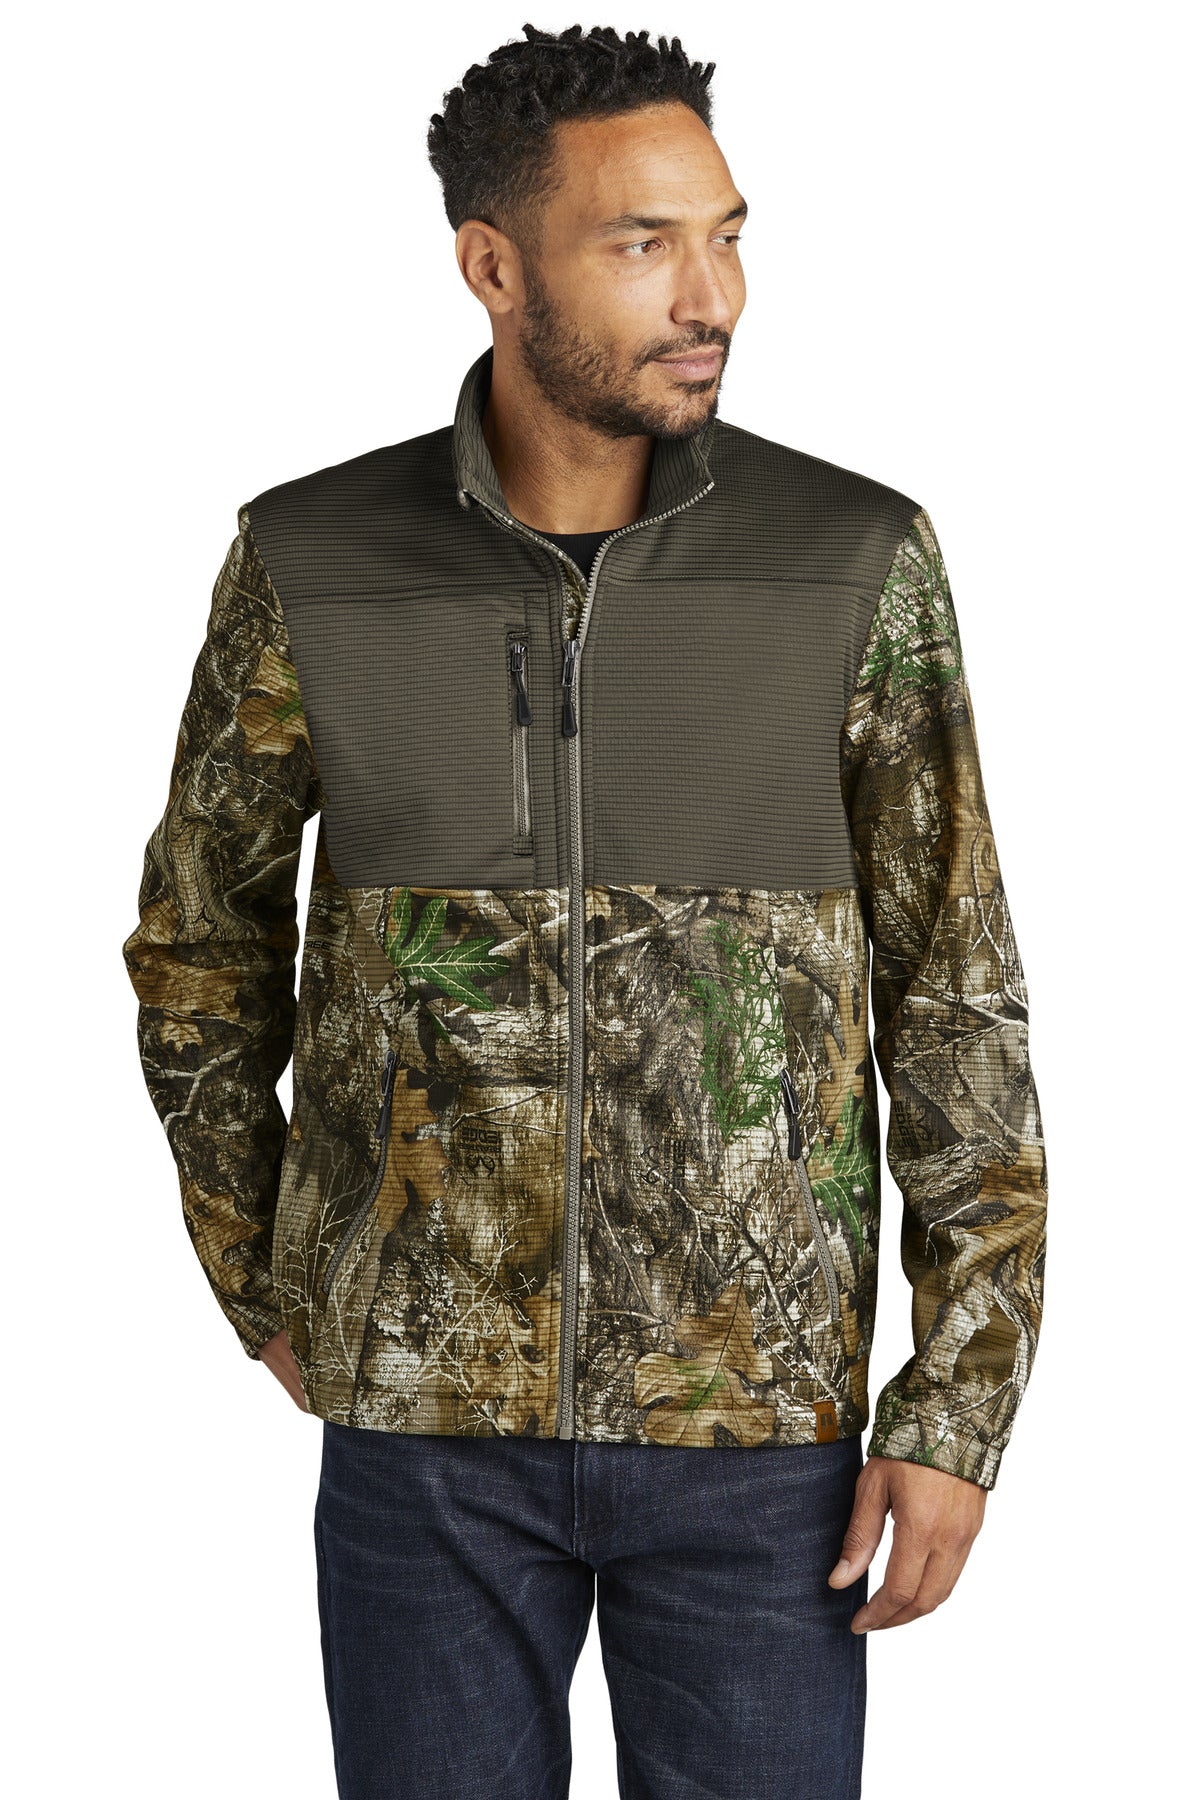 Outerwear Cargo Brown/ Realtree Edge Russell Outdoors